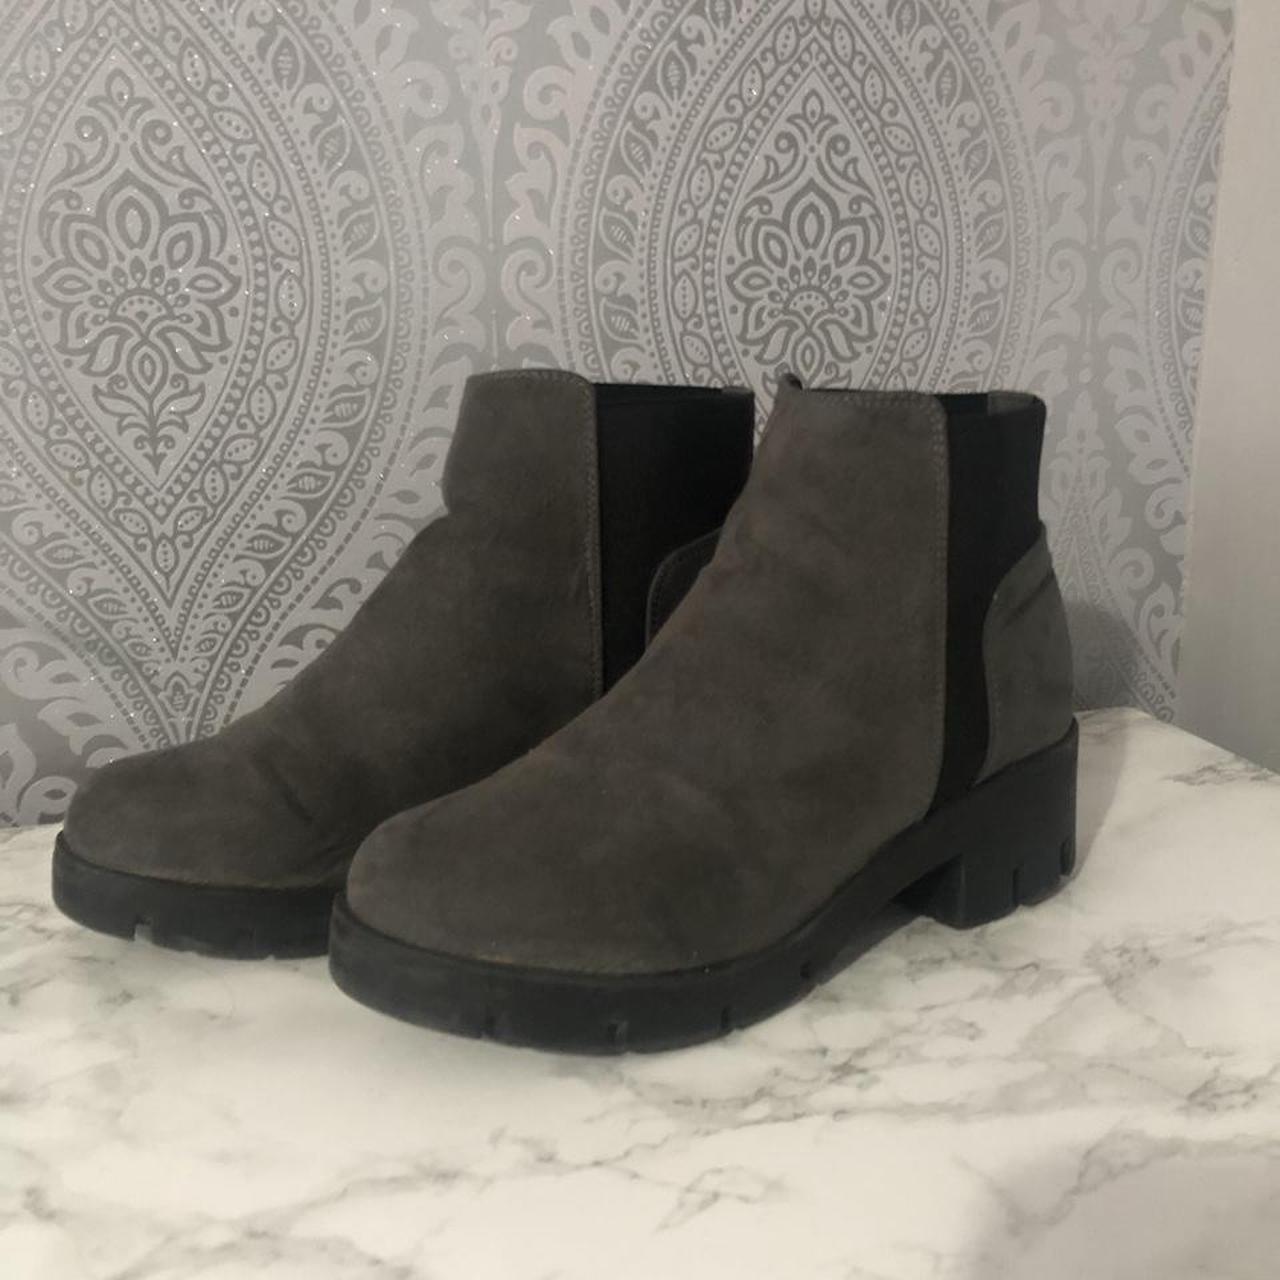 Grey suede ankle boots, size 5. Great condition.... - Depop